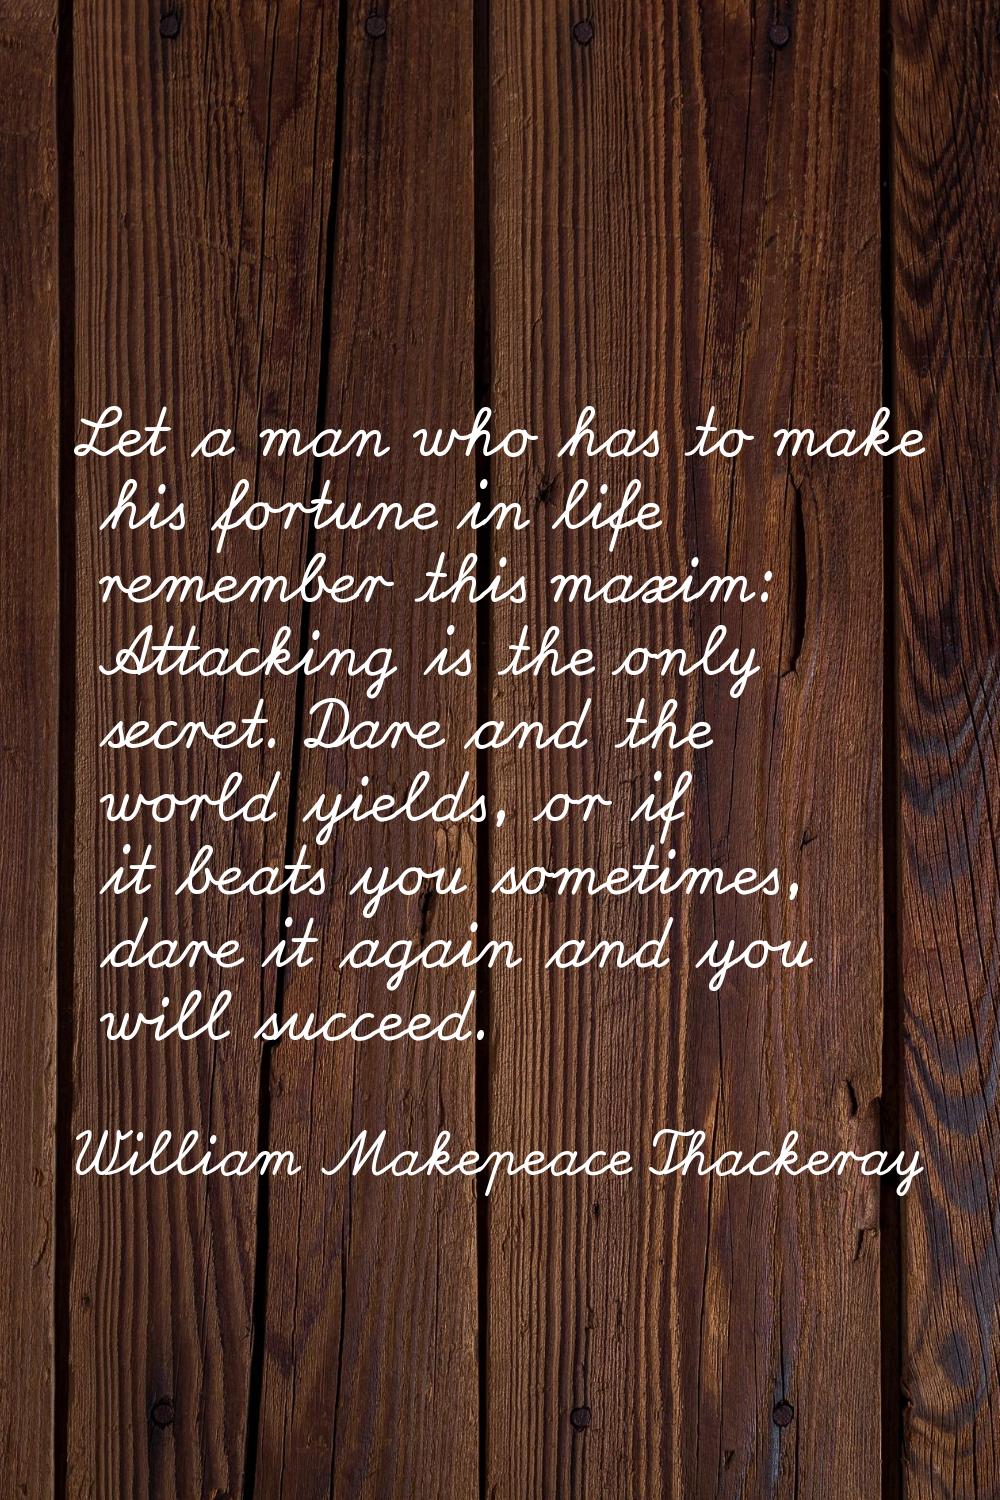 Let a man who has to make his fortune in life remember this maxim: Attacking is the only secret. Da